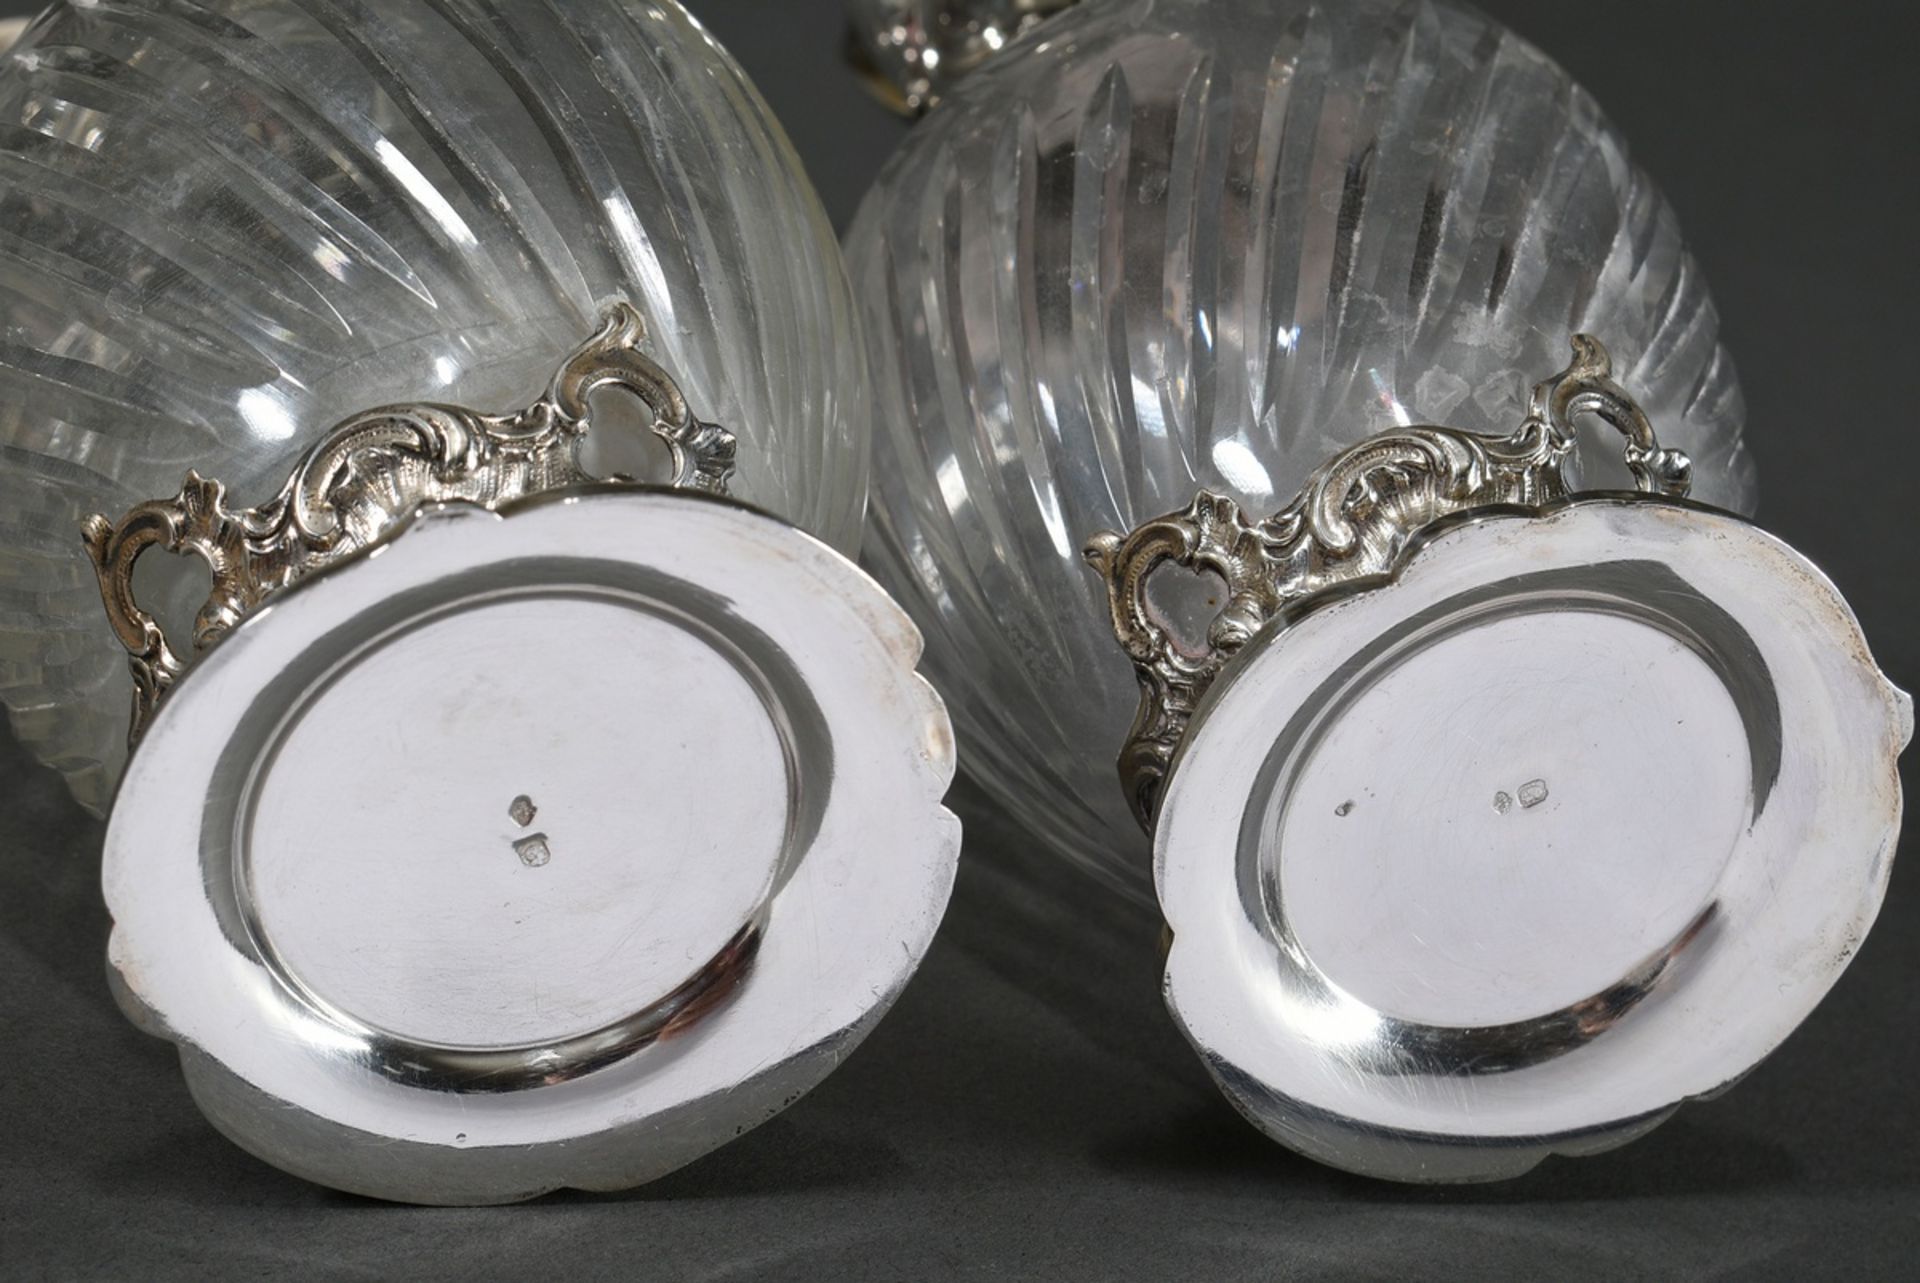 2 Small rum decanters with floral silver mounting in neo-rococo style on neck and foot as well as d - Image 7 of 8